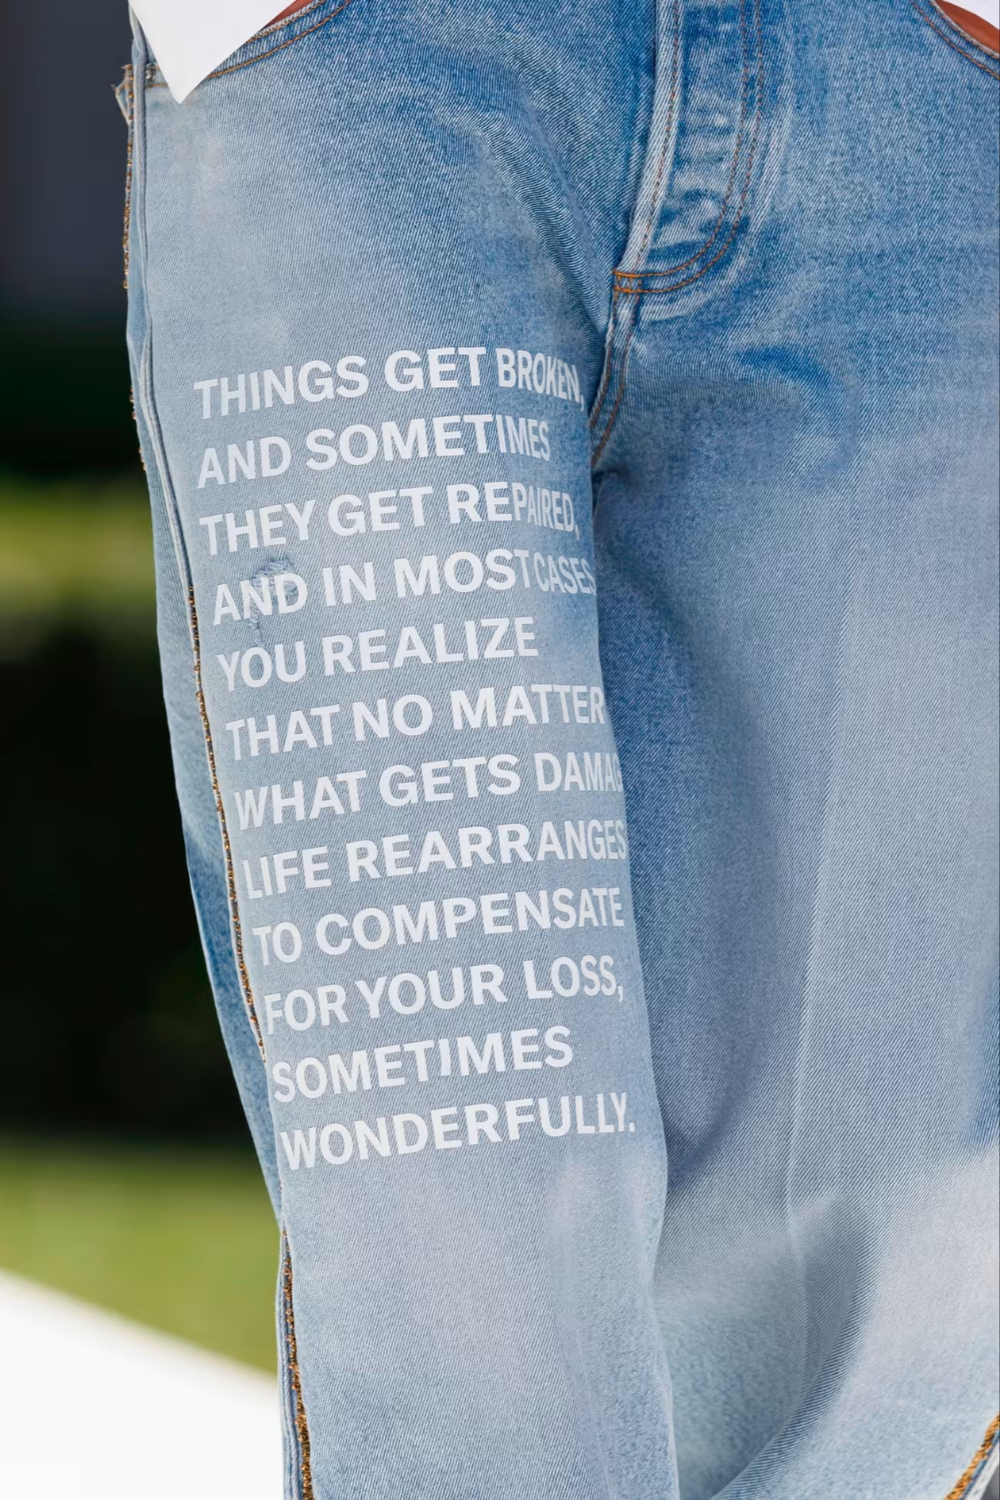 Valentino jeans featuring text from Hanya Yanagihara’s novel ‘A Little Life’